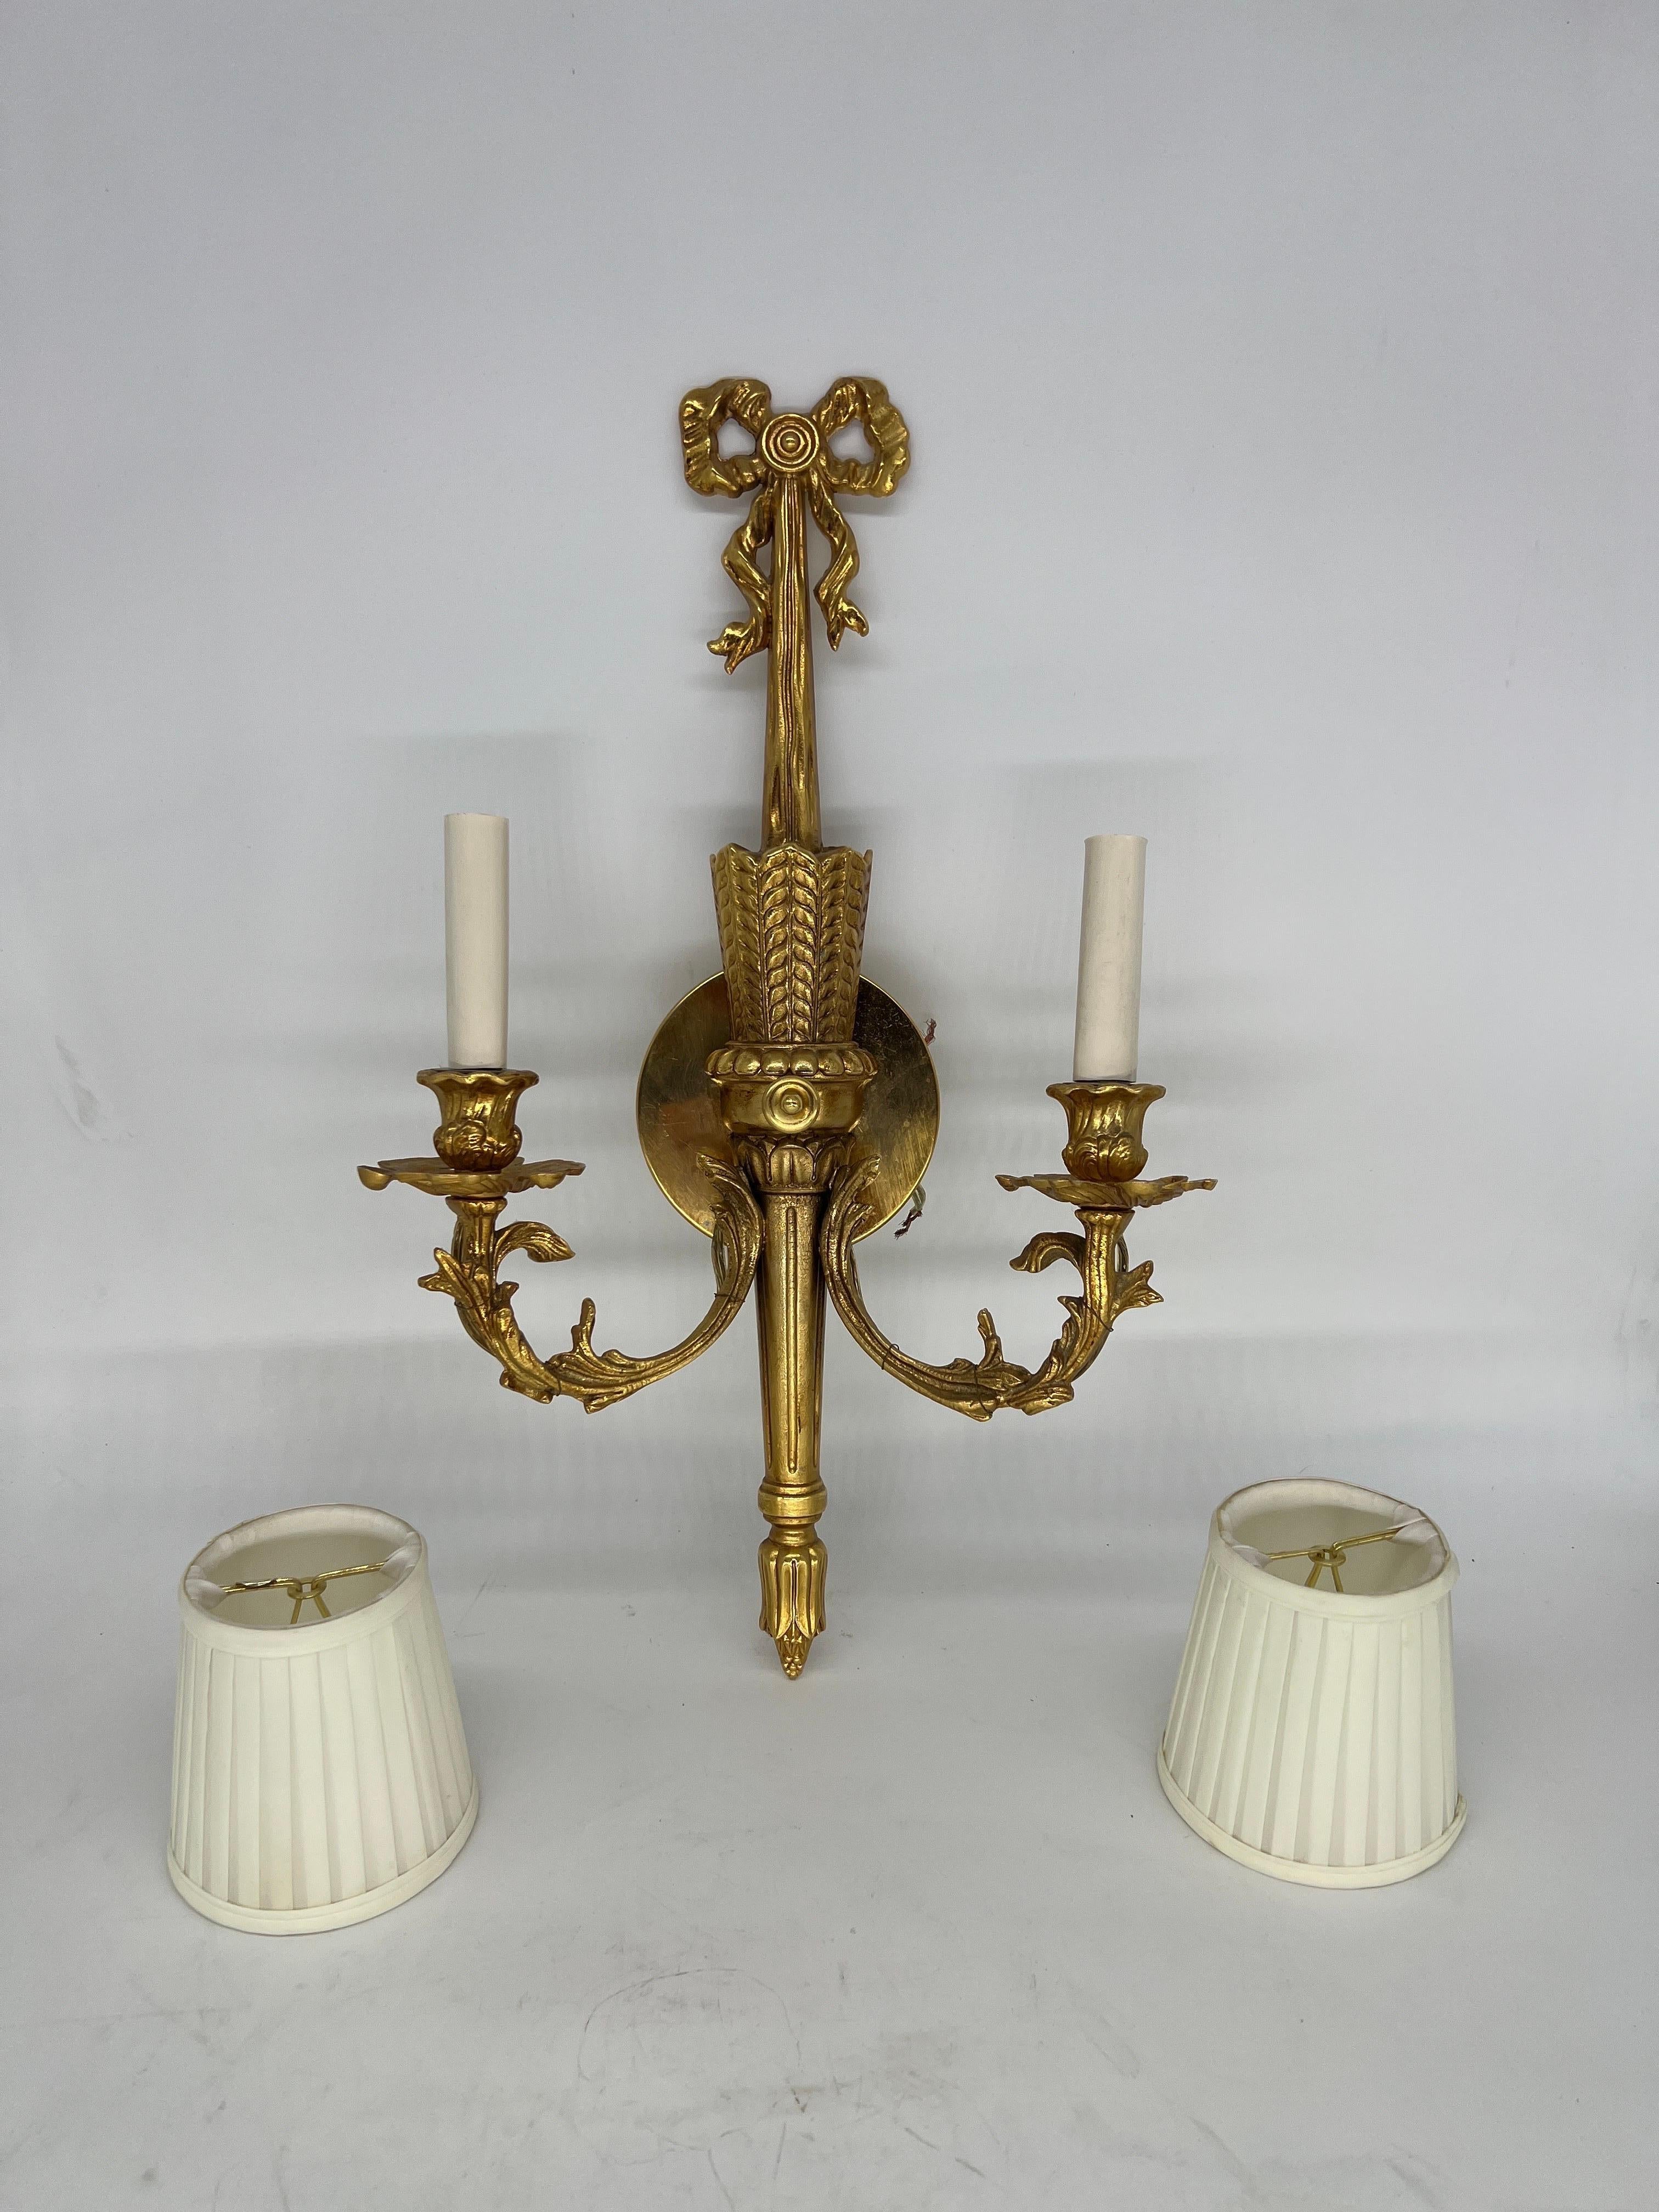 Italian, 20th century.

Each of these sconces have a gilt bronze body in a traditional neoclassical or adams style form. They feature a two arm design with professional wiring. Also included with each sconce is a pair of shades. Marked to verso